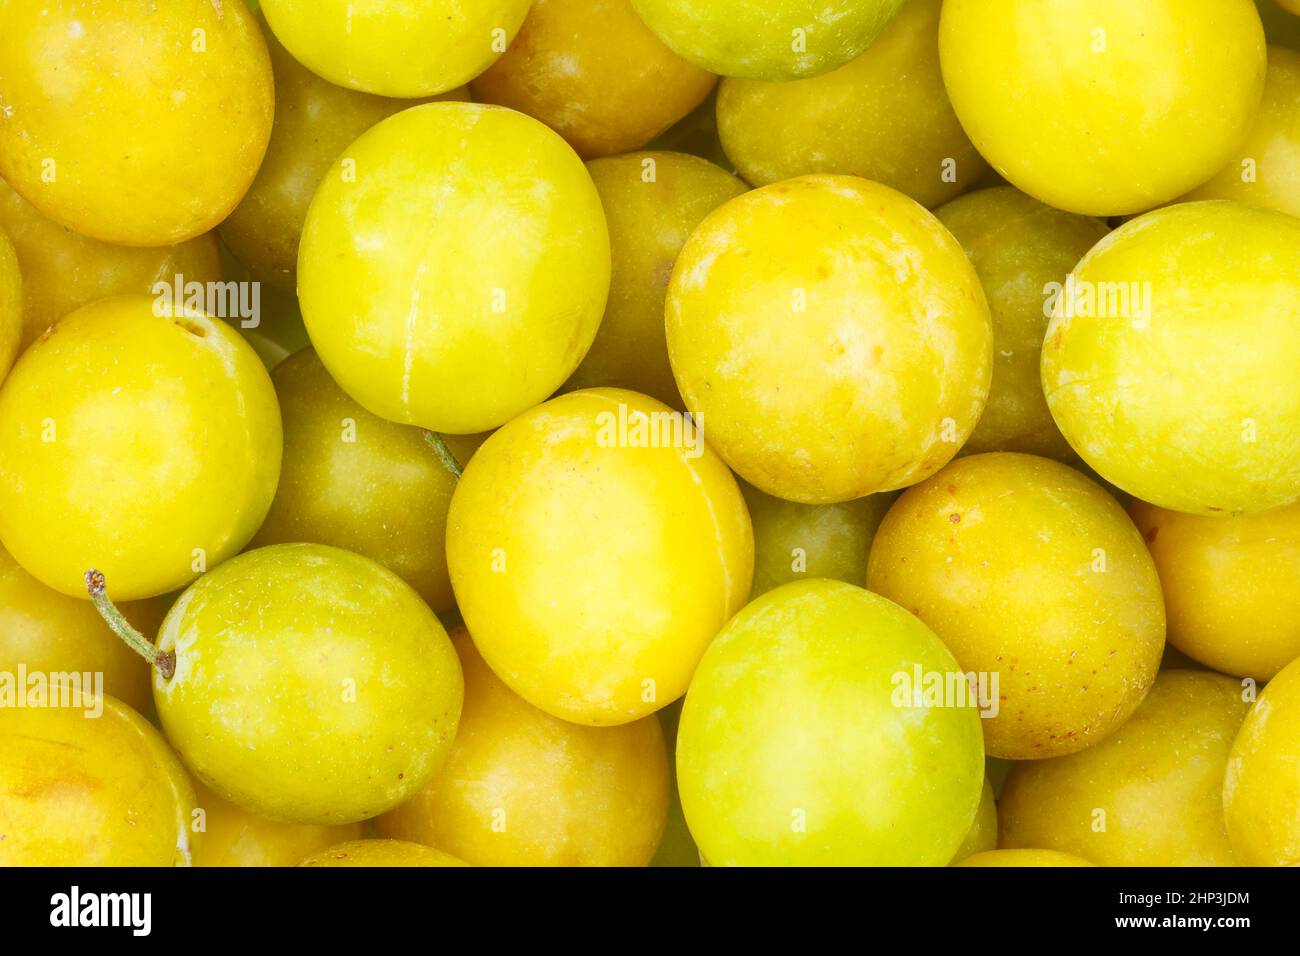 Mirabelles fruits mirabelle plum fruit background from above Stock Photo